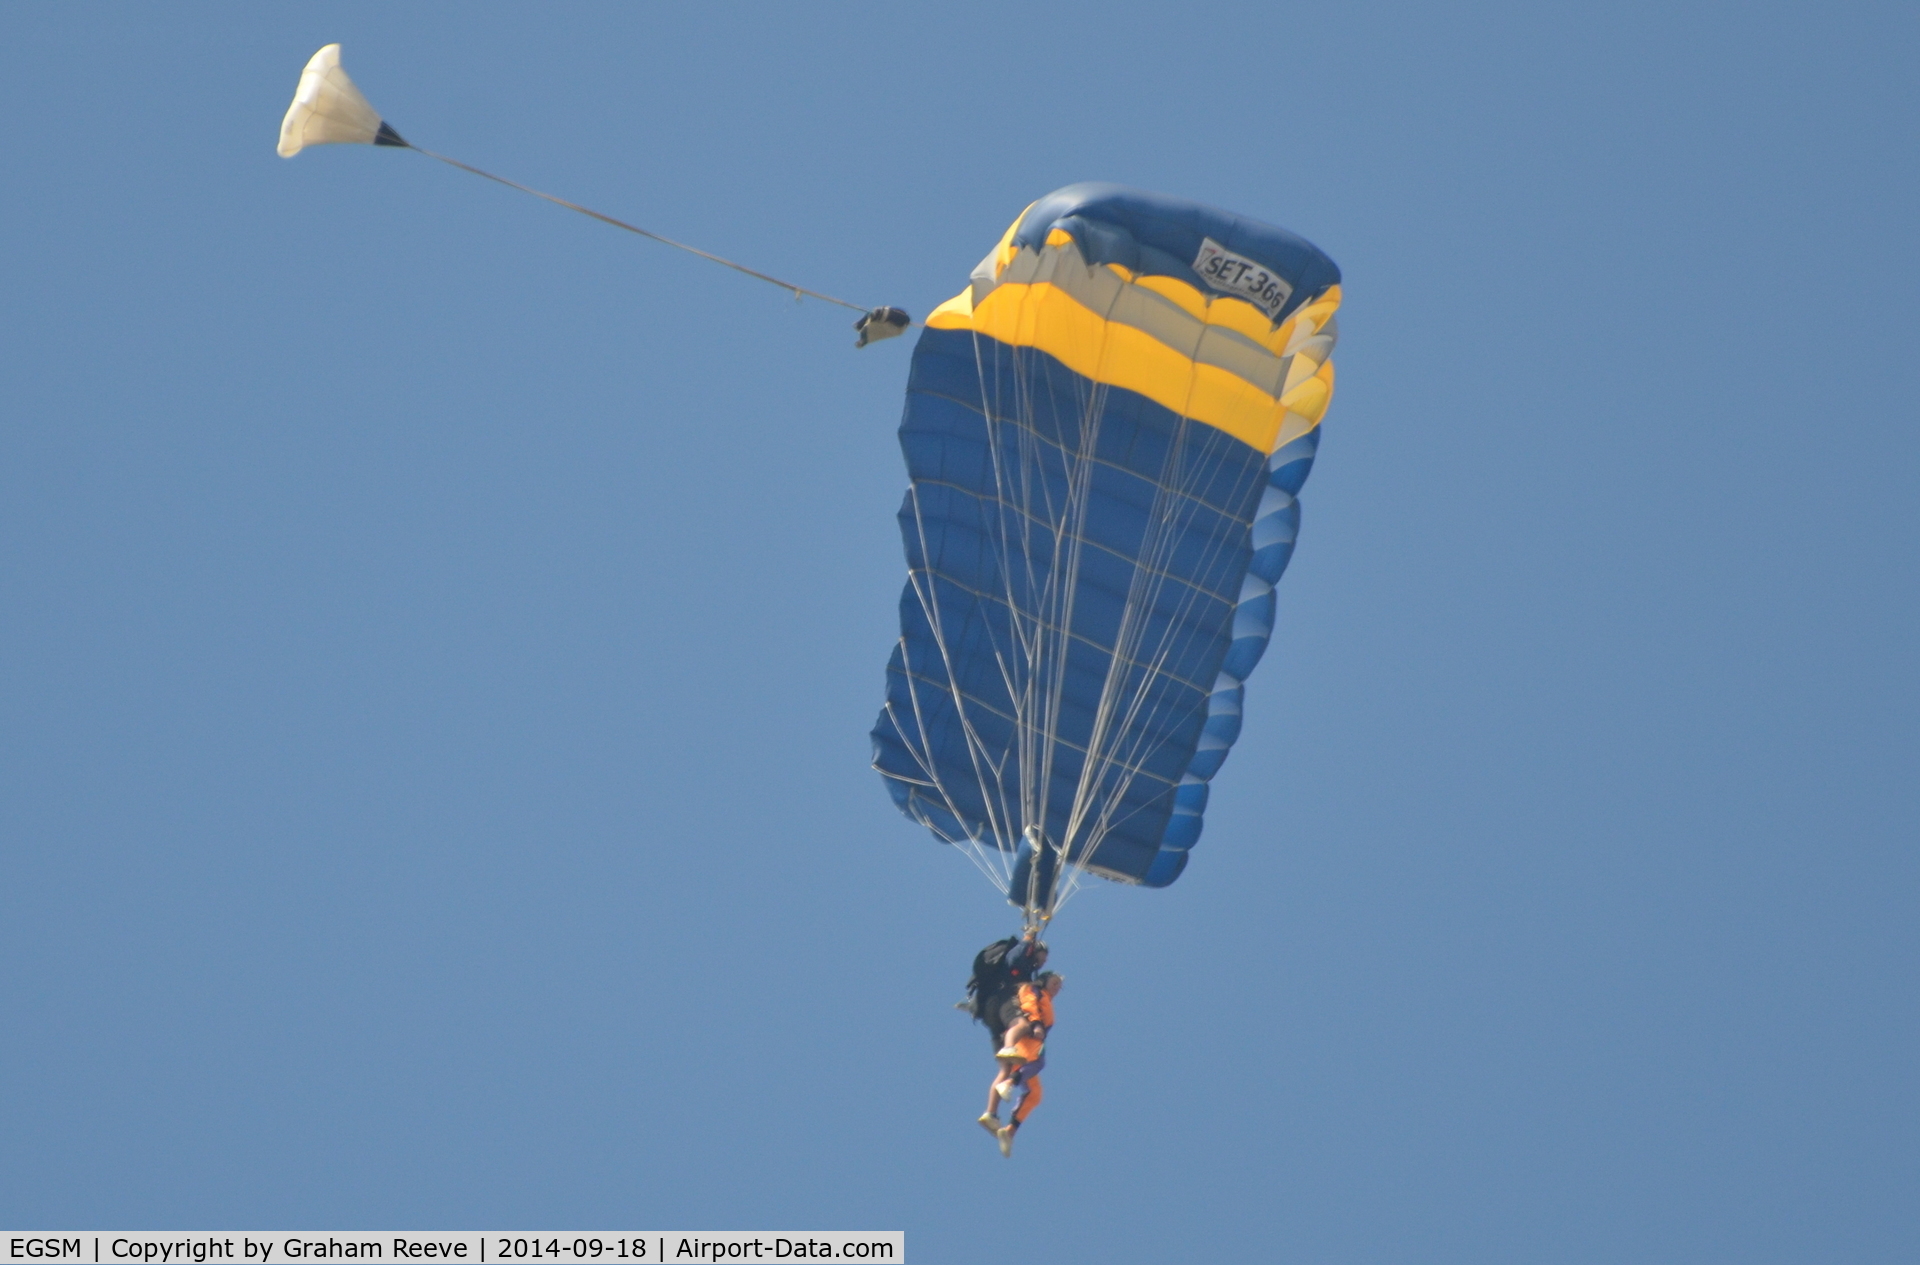 Beccles Airport, Beccles, England United Kingdom (EGSM) - Parachute at Beccles.